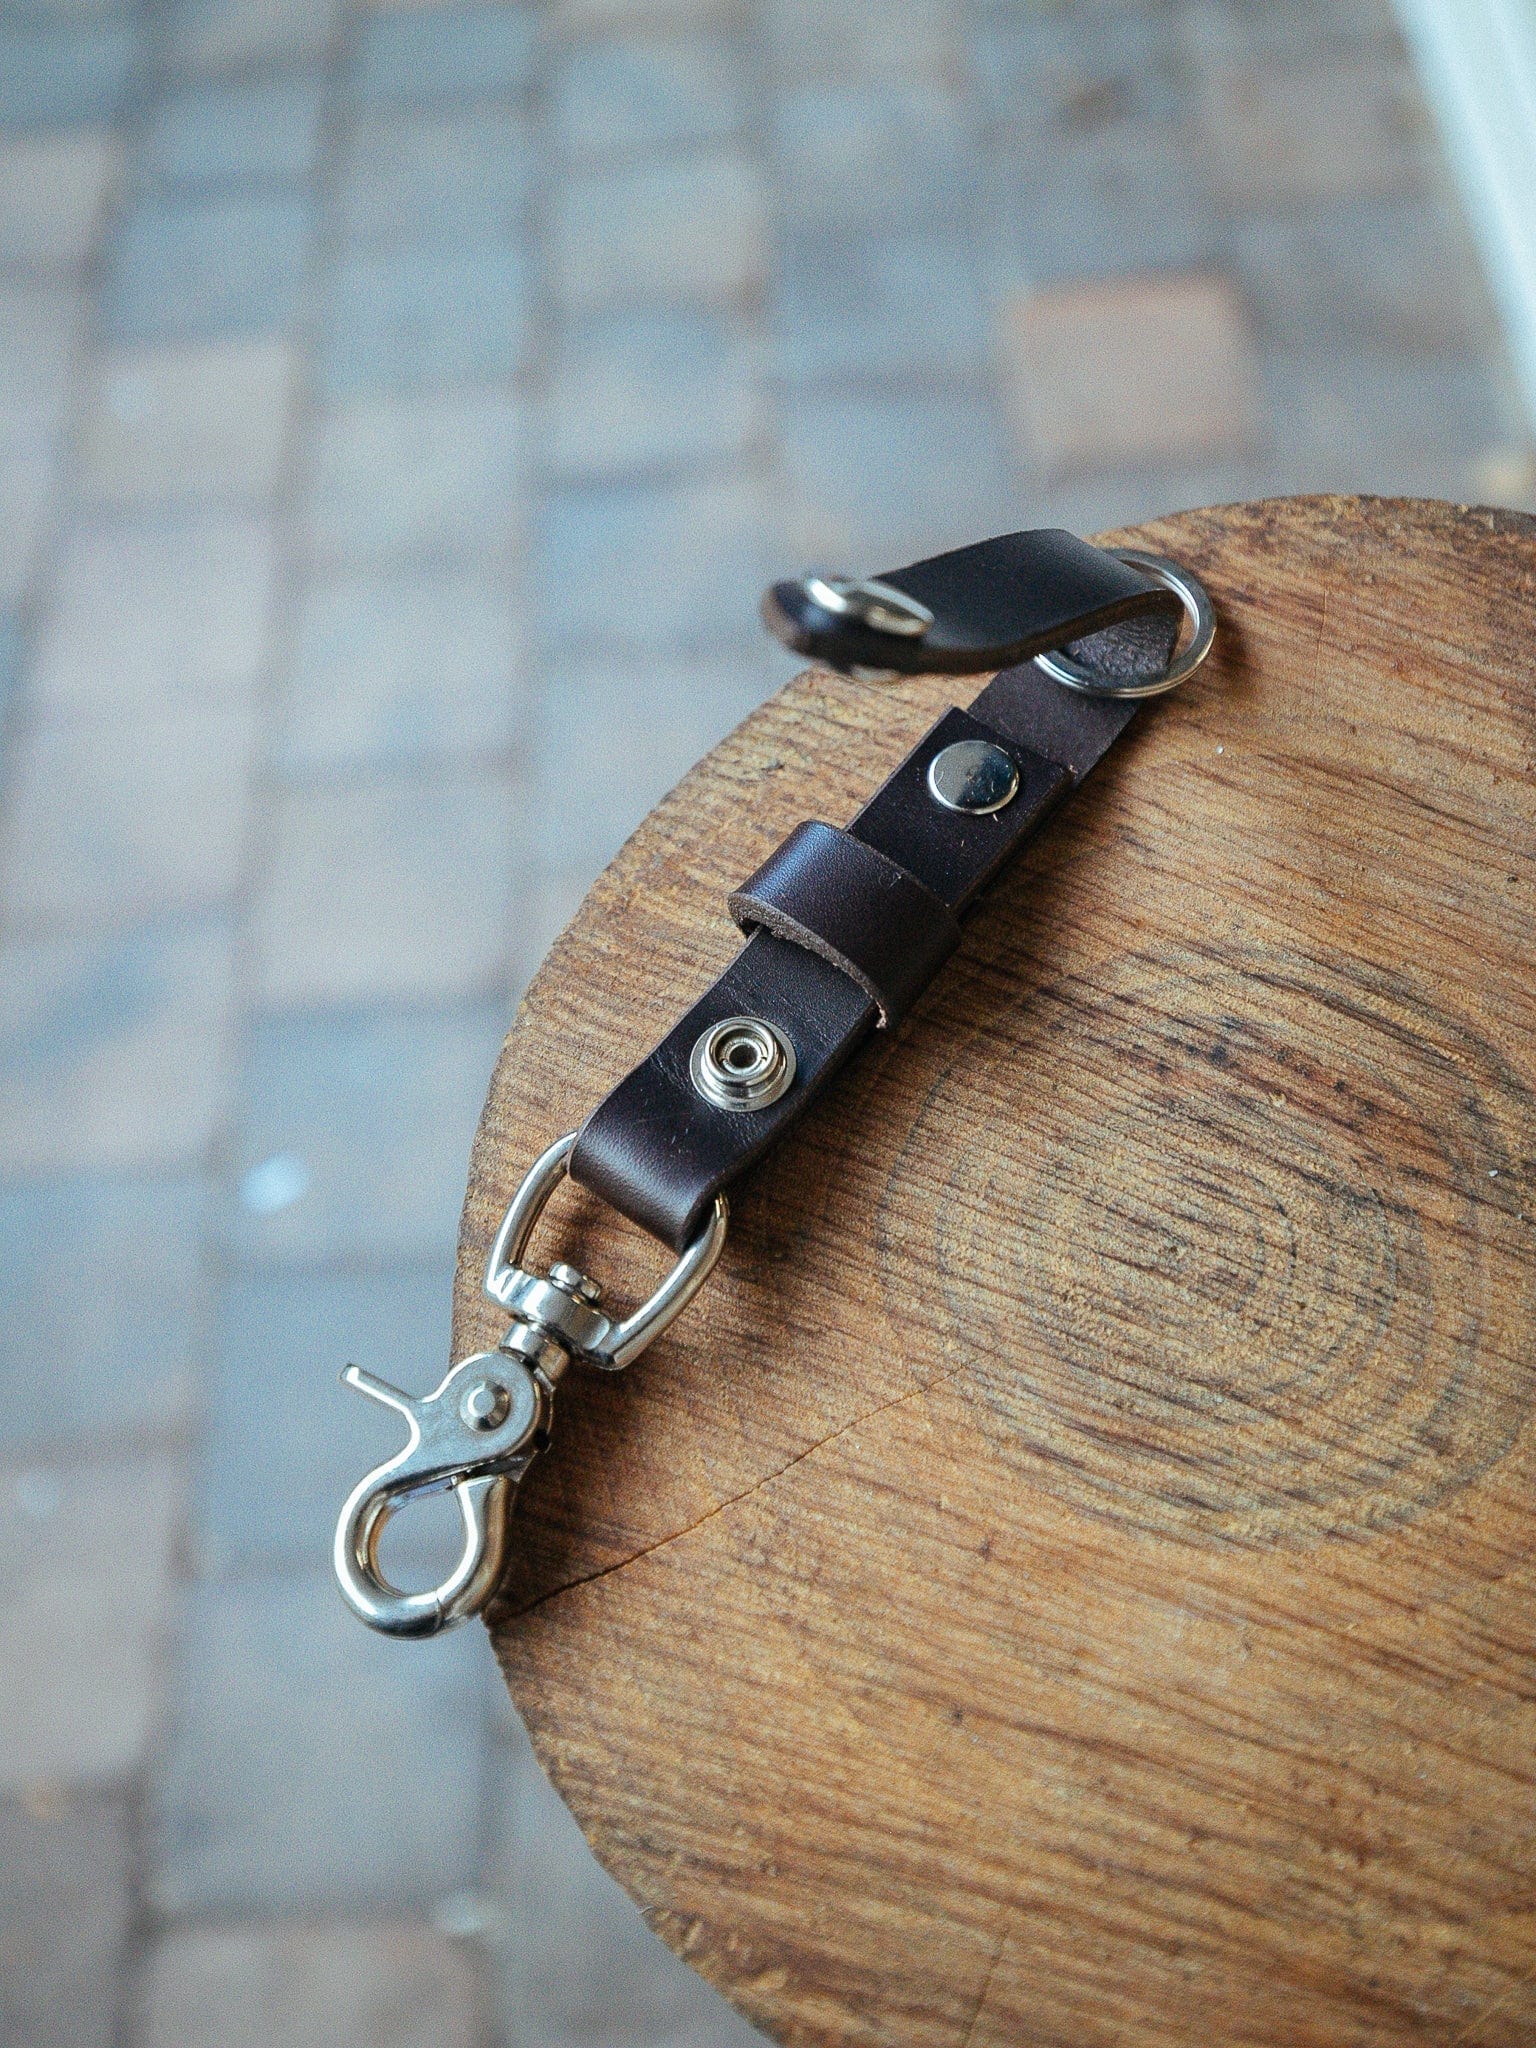 Buy Leather Dog Keychain Online In India -  India